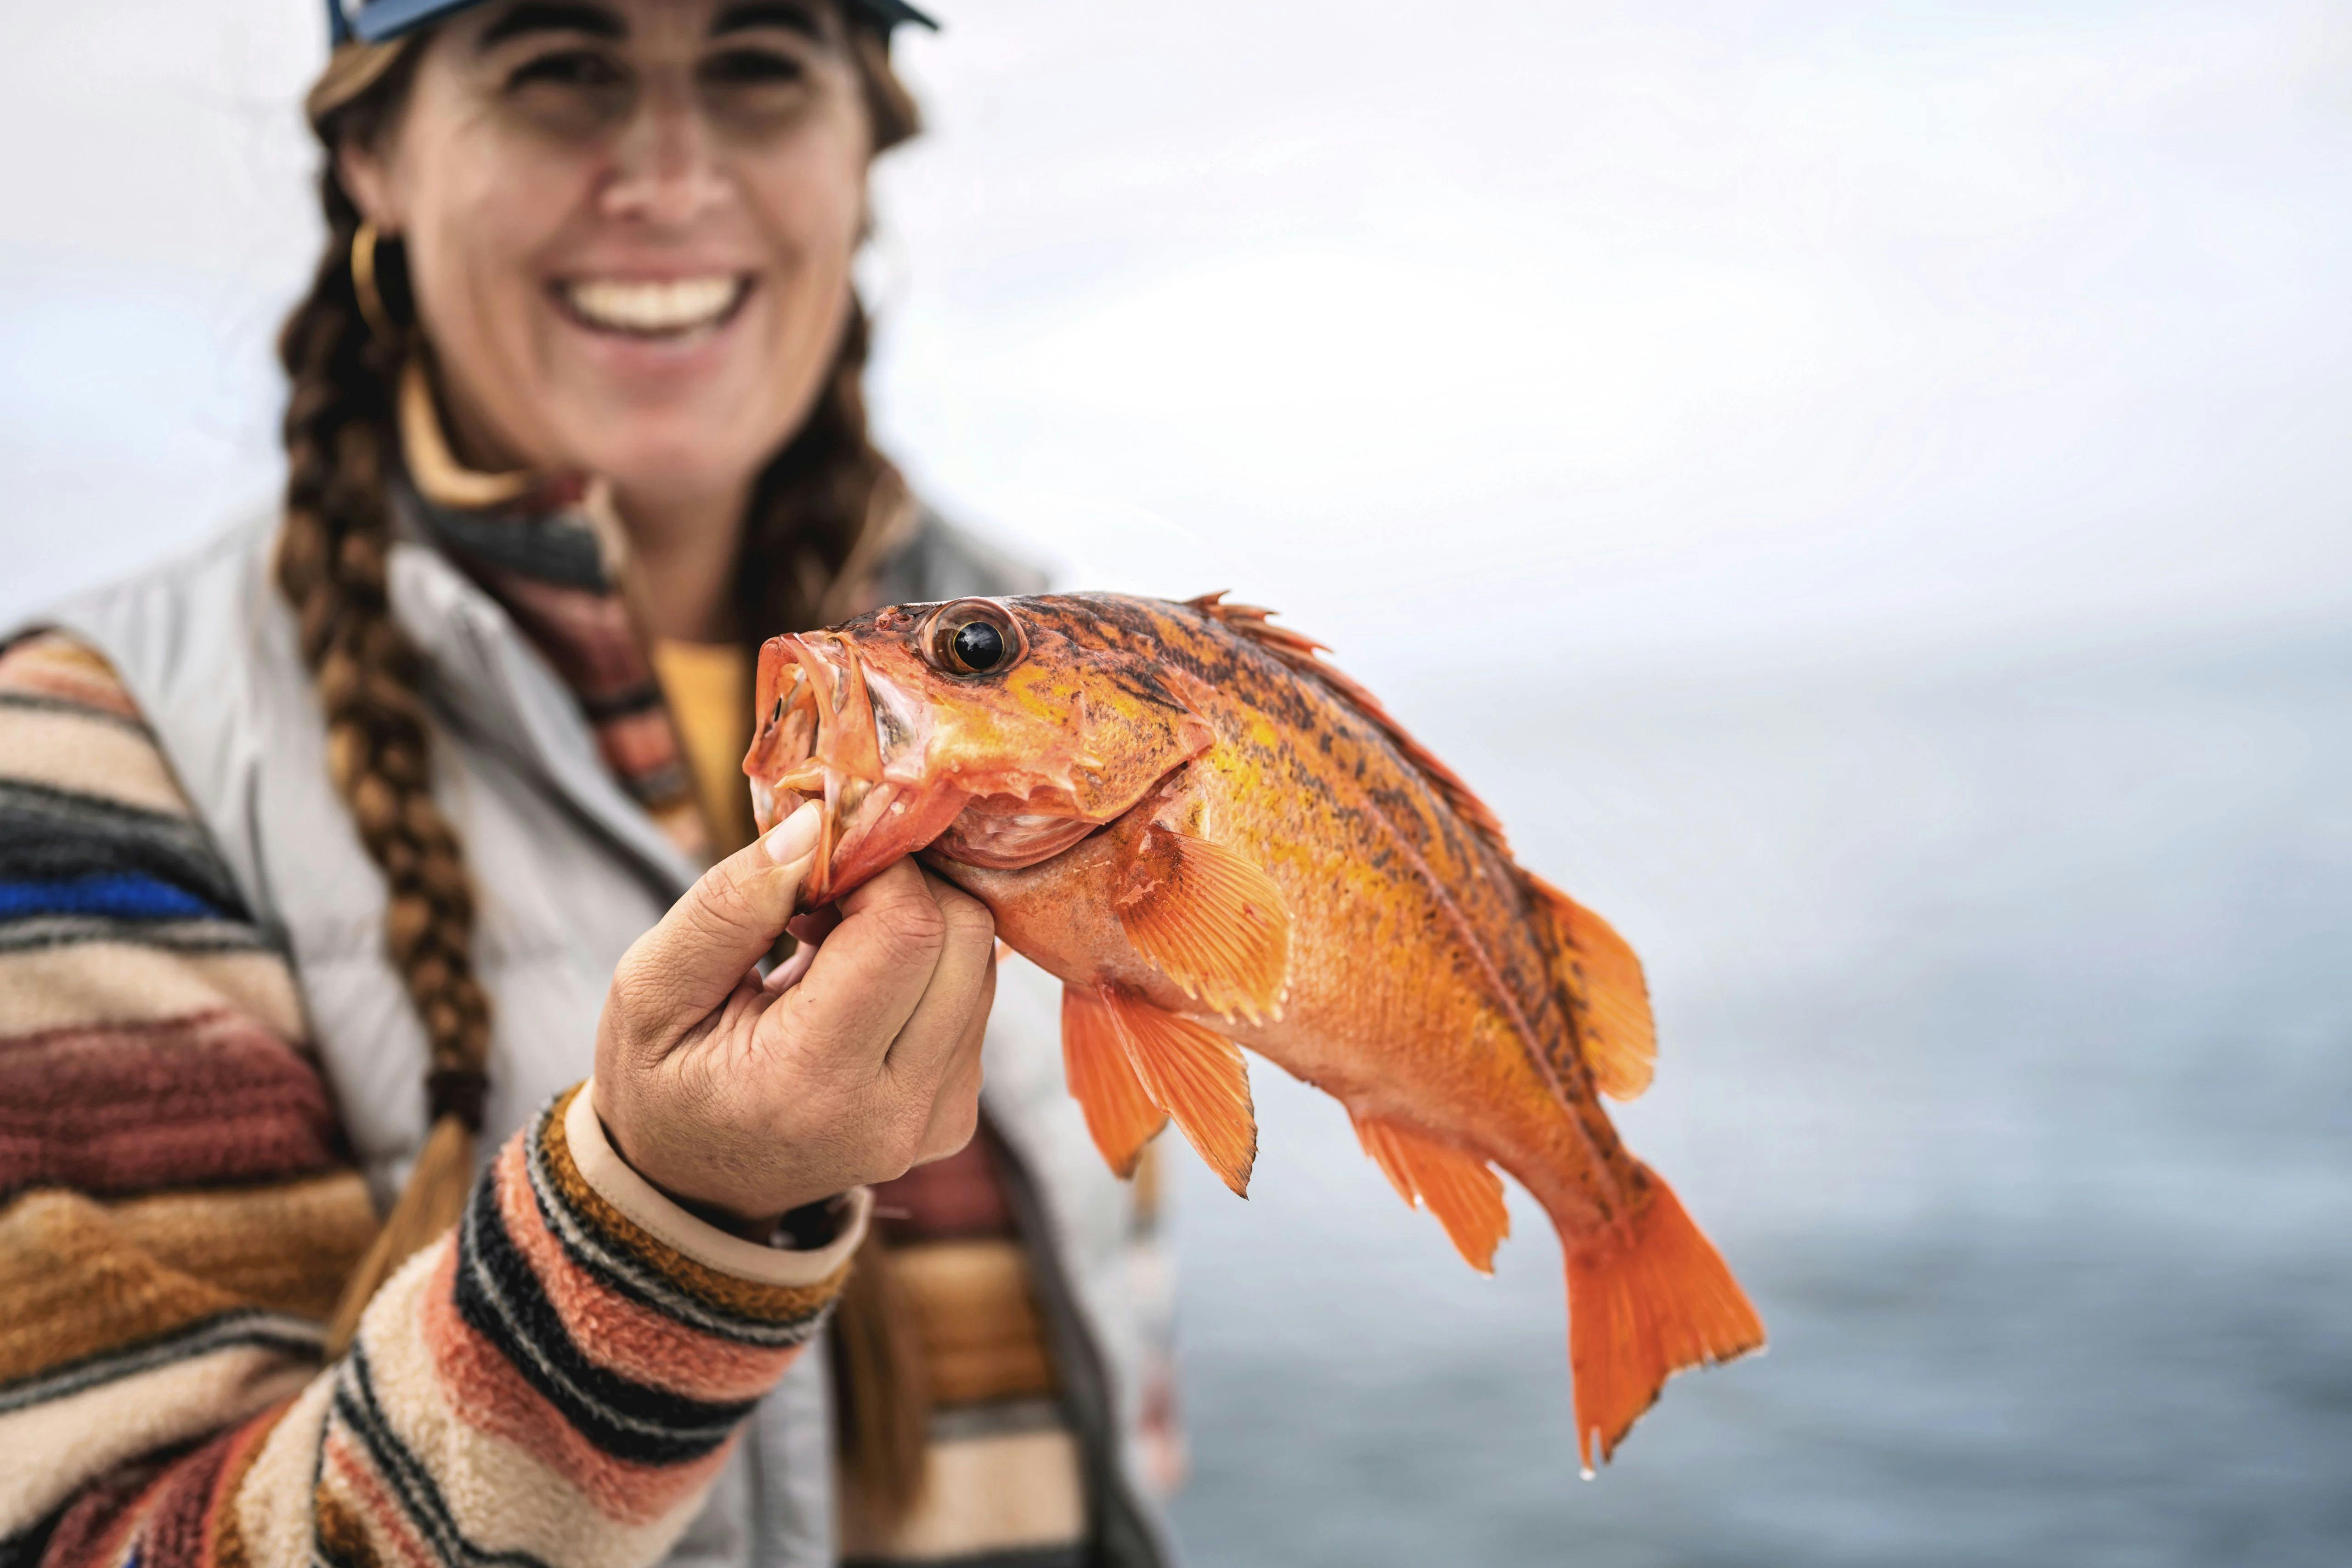 Sarah Glover holding up a rockfish that she just caught.